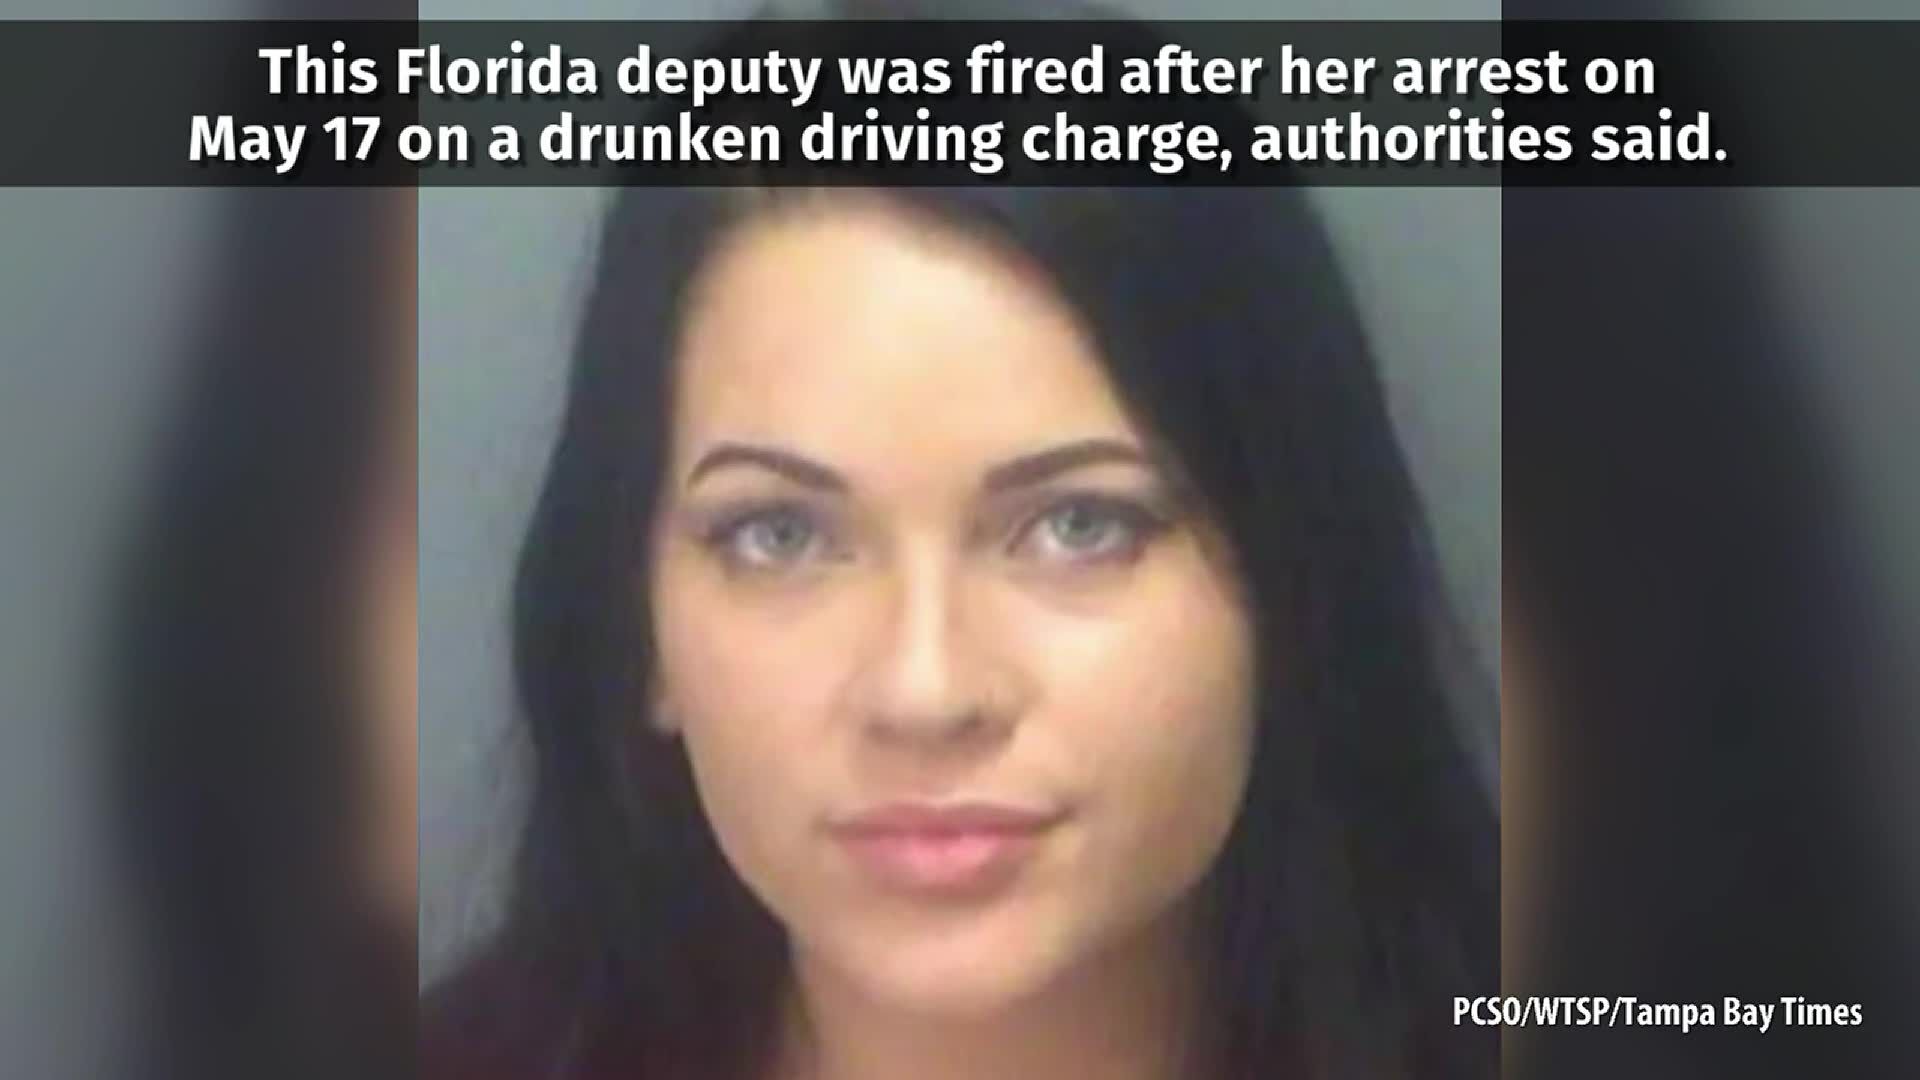 Florida deputy fired after arrest on DUI charge Trending fox23